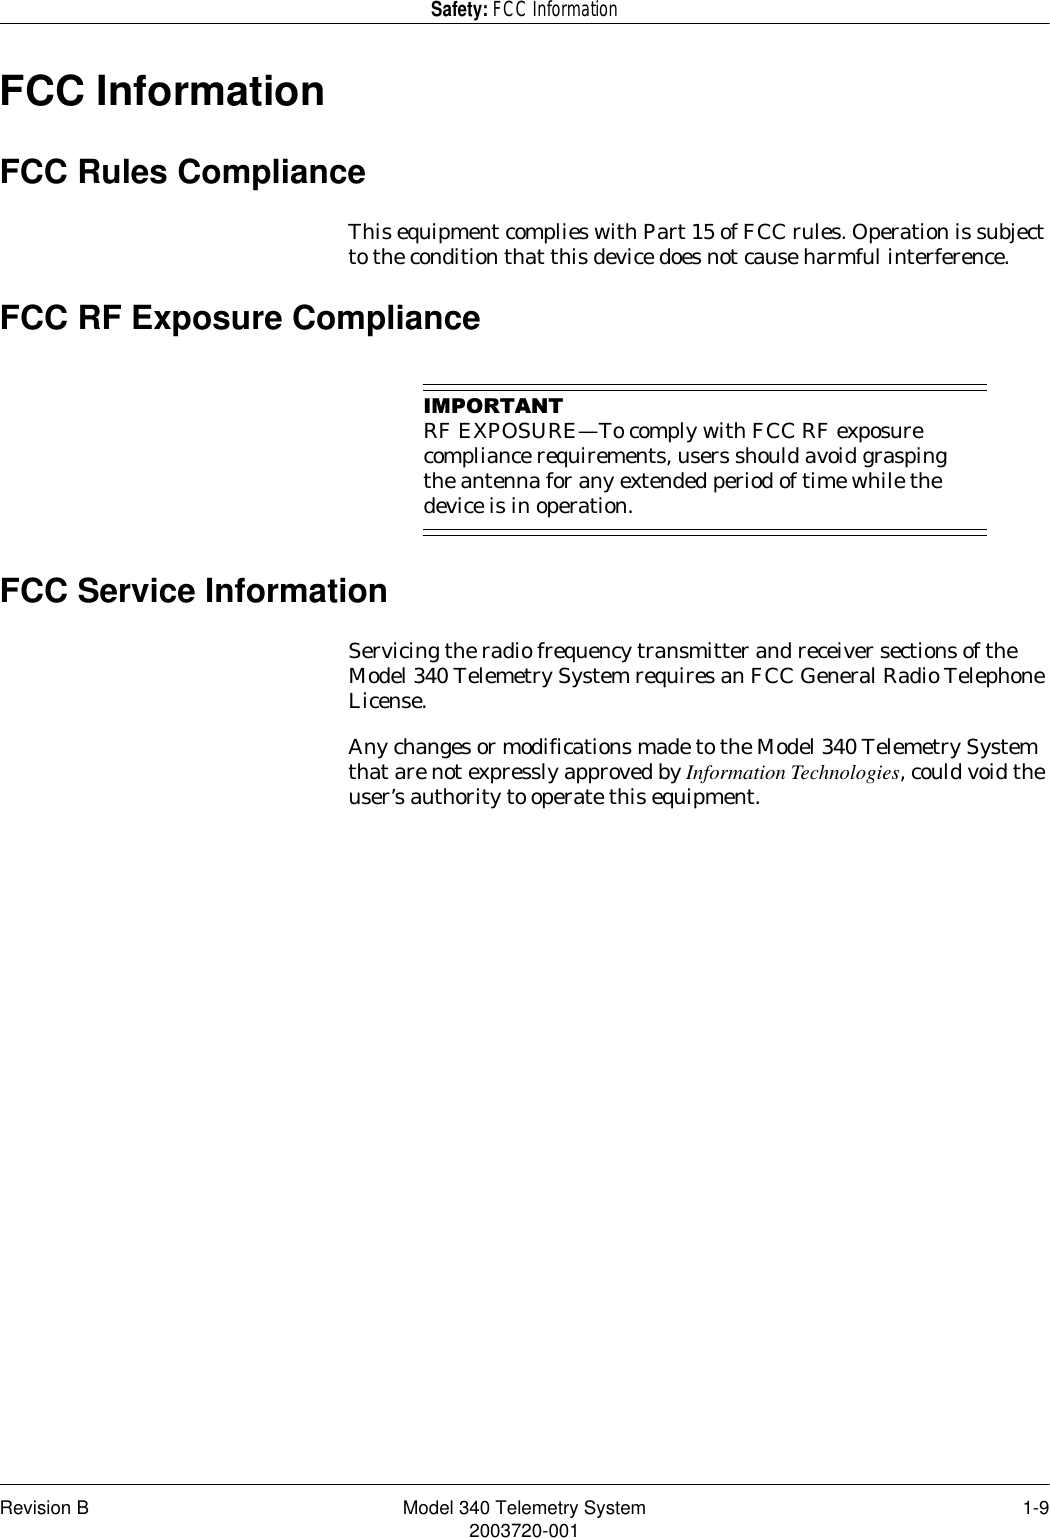 Revision B Model 340 Telemetry System 1-92003720-001Safety: FCC InformationFCC InformationFCC Rules ComplianceThis equipment complies with Part 15 of FCC rules. Operation is subject to the condition that this device does not cause harmful interference.FCC RF Exposure Compliance,03257$17RF EXPOSURE—To comply with FCC RF exposure compliance requirements, users should avoid grasping the antenna for any extended period of time while the device is in operation.FCC Service InformationServicing the radio frequency transmitter and receiver sections of the Model 340 Telemetry System requires an FCC General Radio Telephone License.Any changes or modifications made to the Model 340 Telemetry System that are not expressly approved by Information Technologies, could void the user’s authority to operate this equipment.